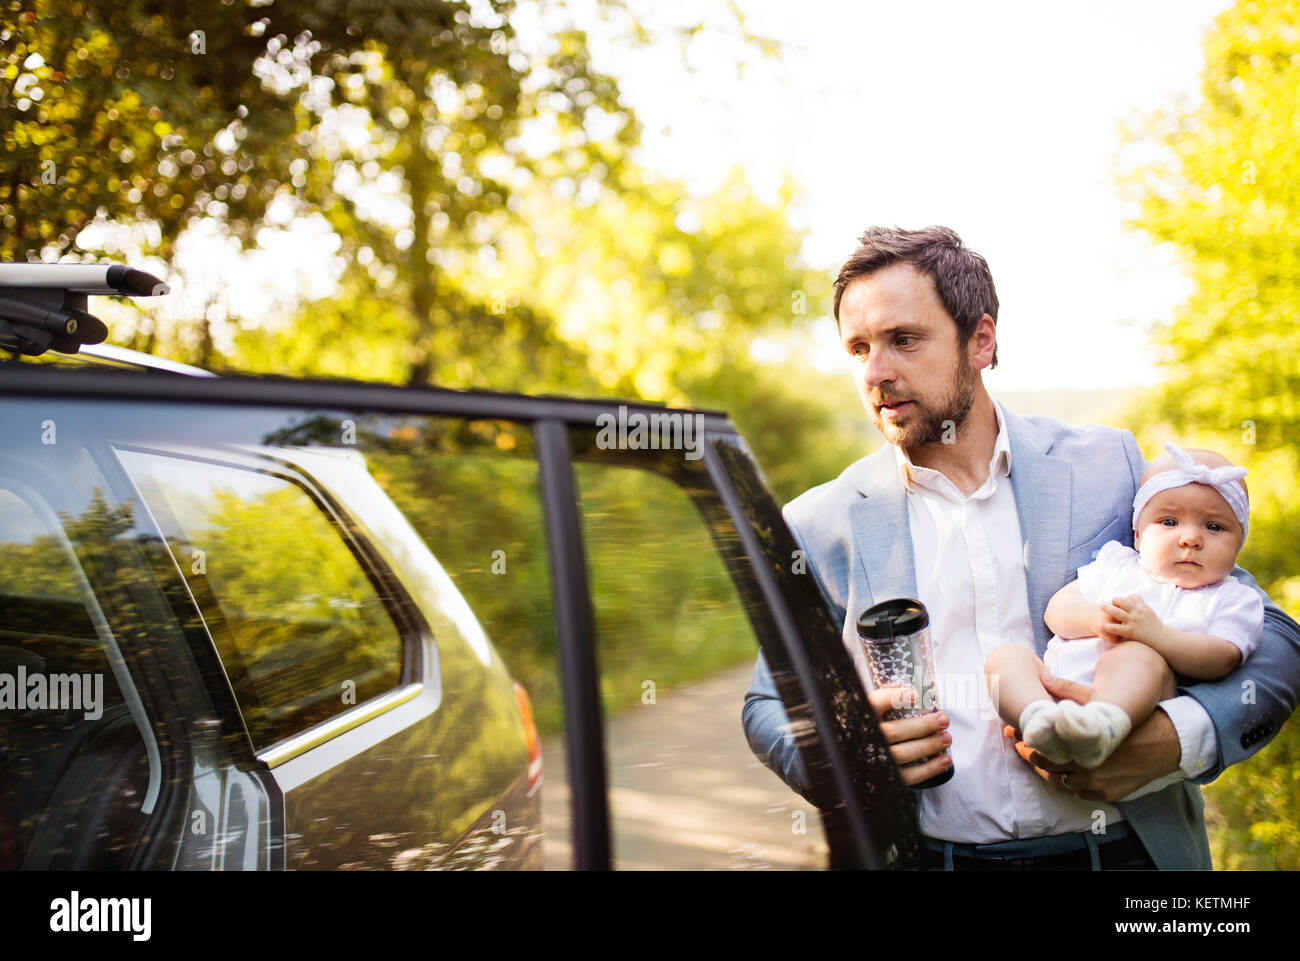 Man carrying his baby girl by the car. Stock Photo